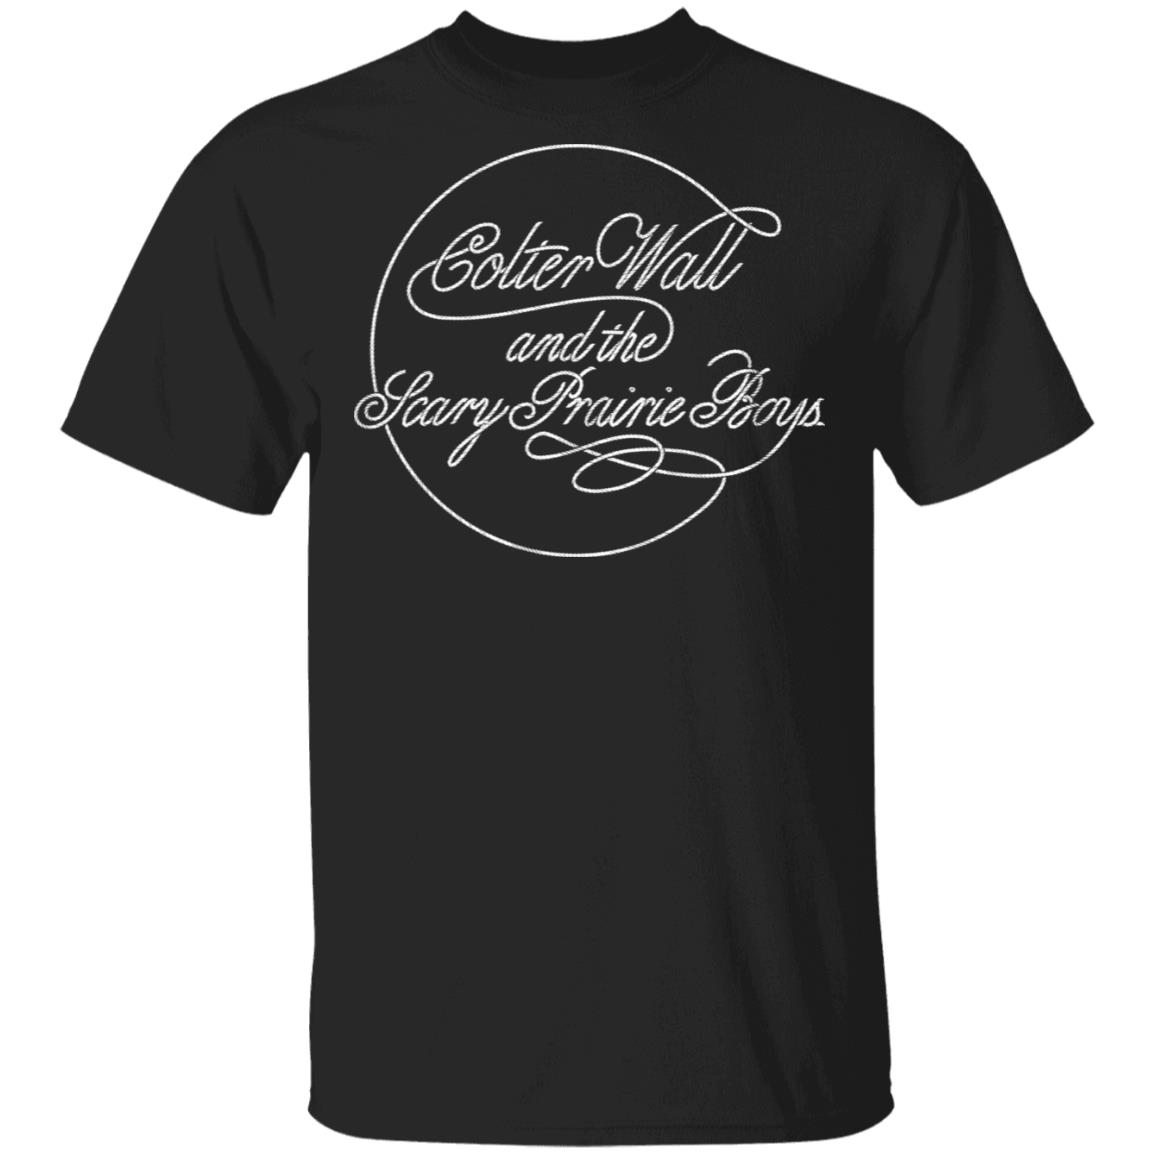 Colter Wall Merch Colter Wall and The Scary Prairie Boys Roper Shirt ...